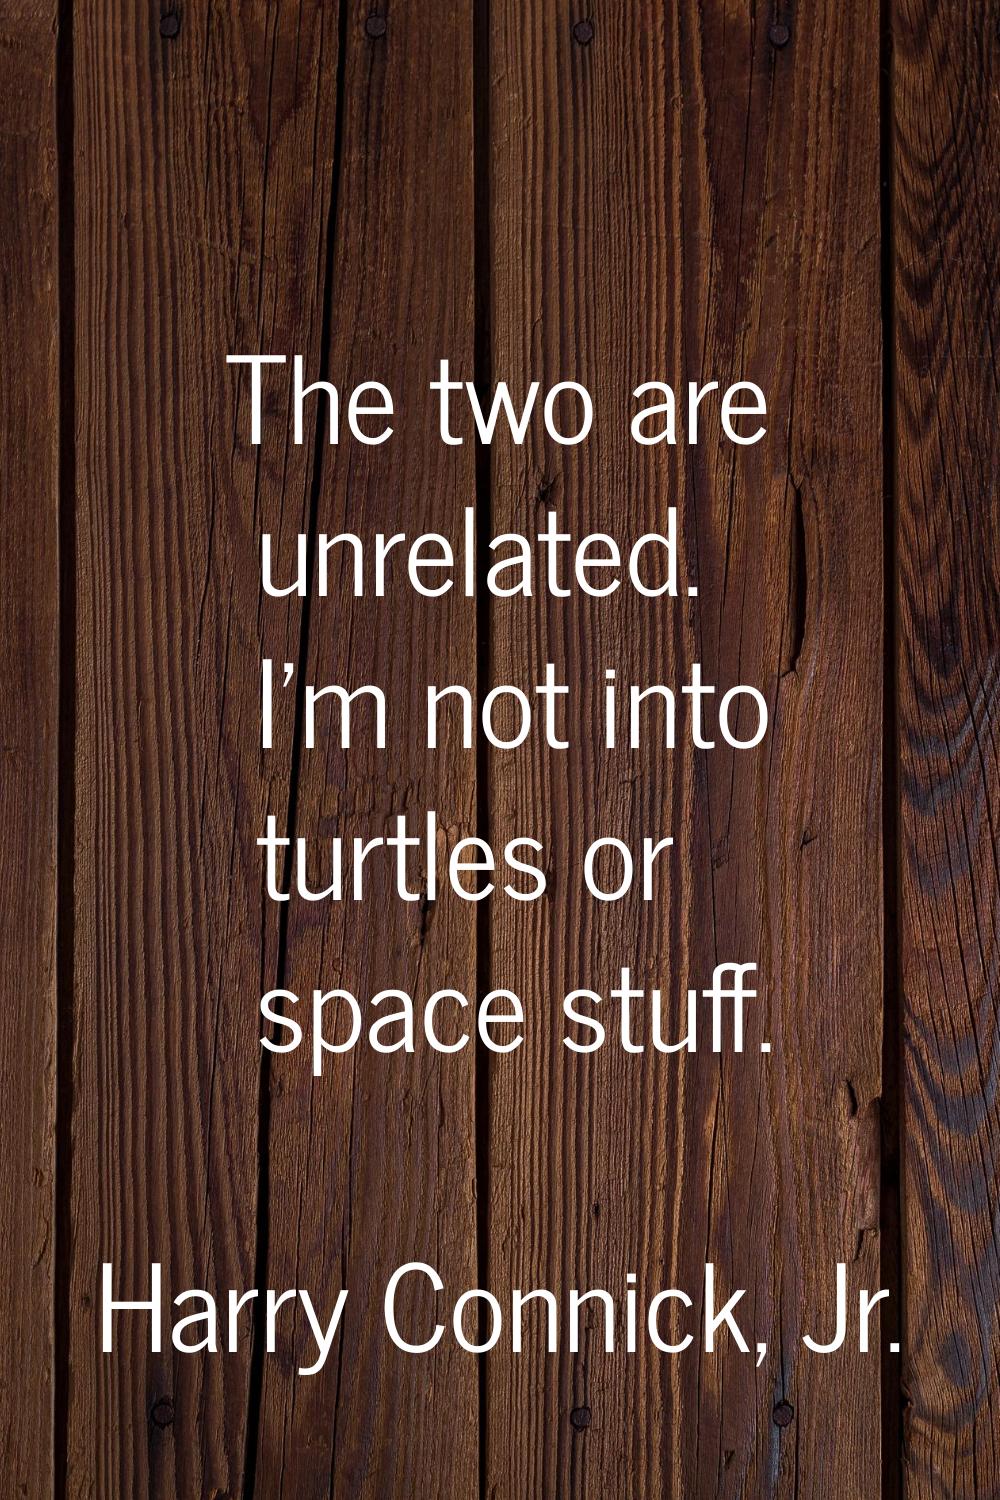 The two are unrelated. I'm not into turtles or space stuff.